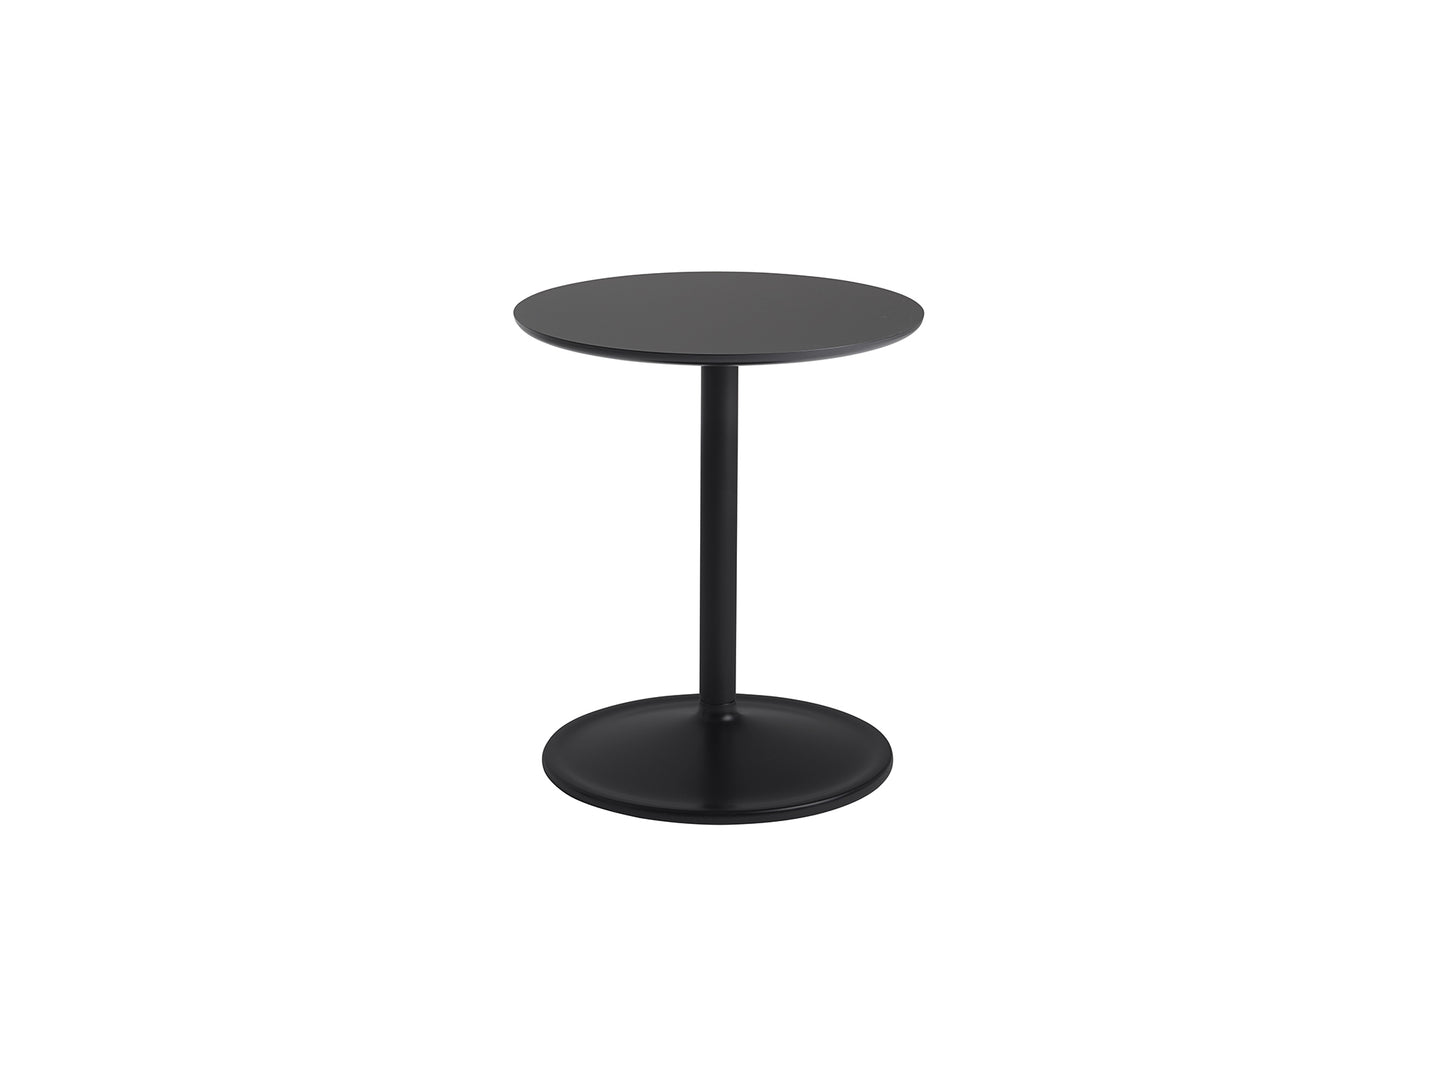 Soft Side Table by Muuto - Diameter : 41 cm / Height: 48cm in black nanolaminate top and black aluminum base